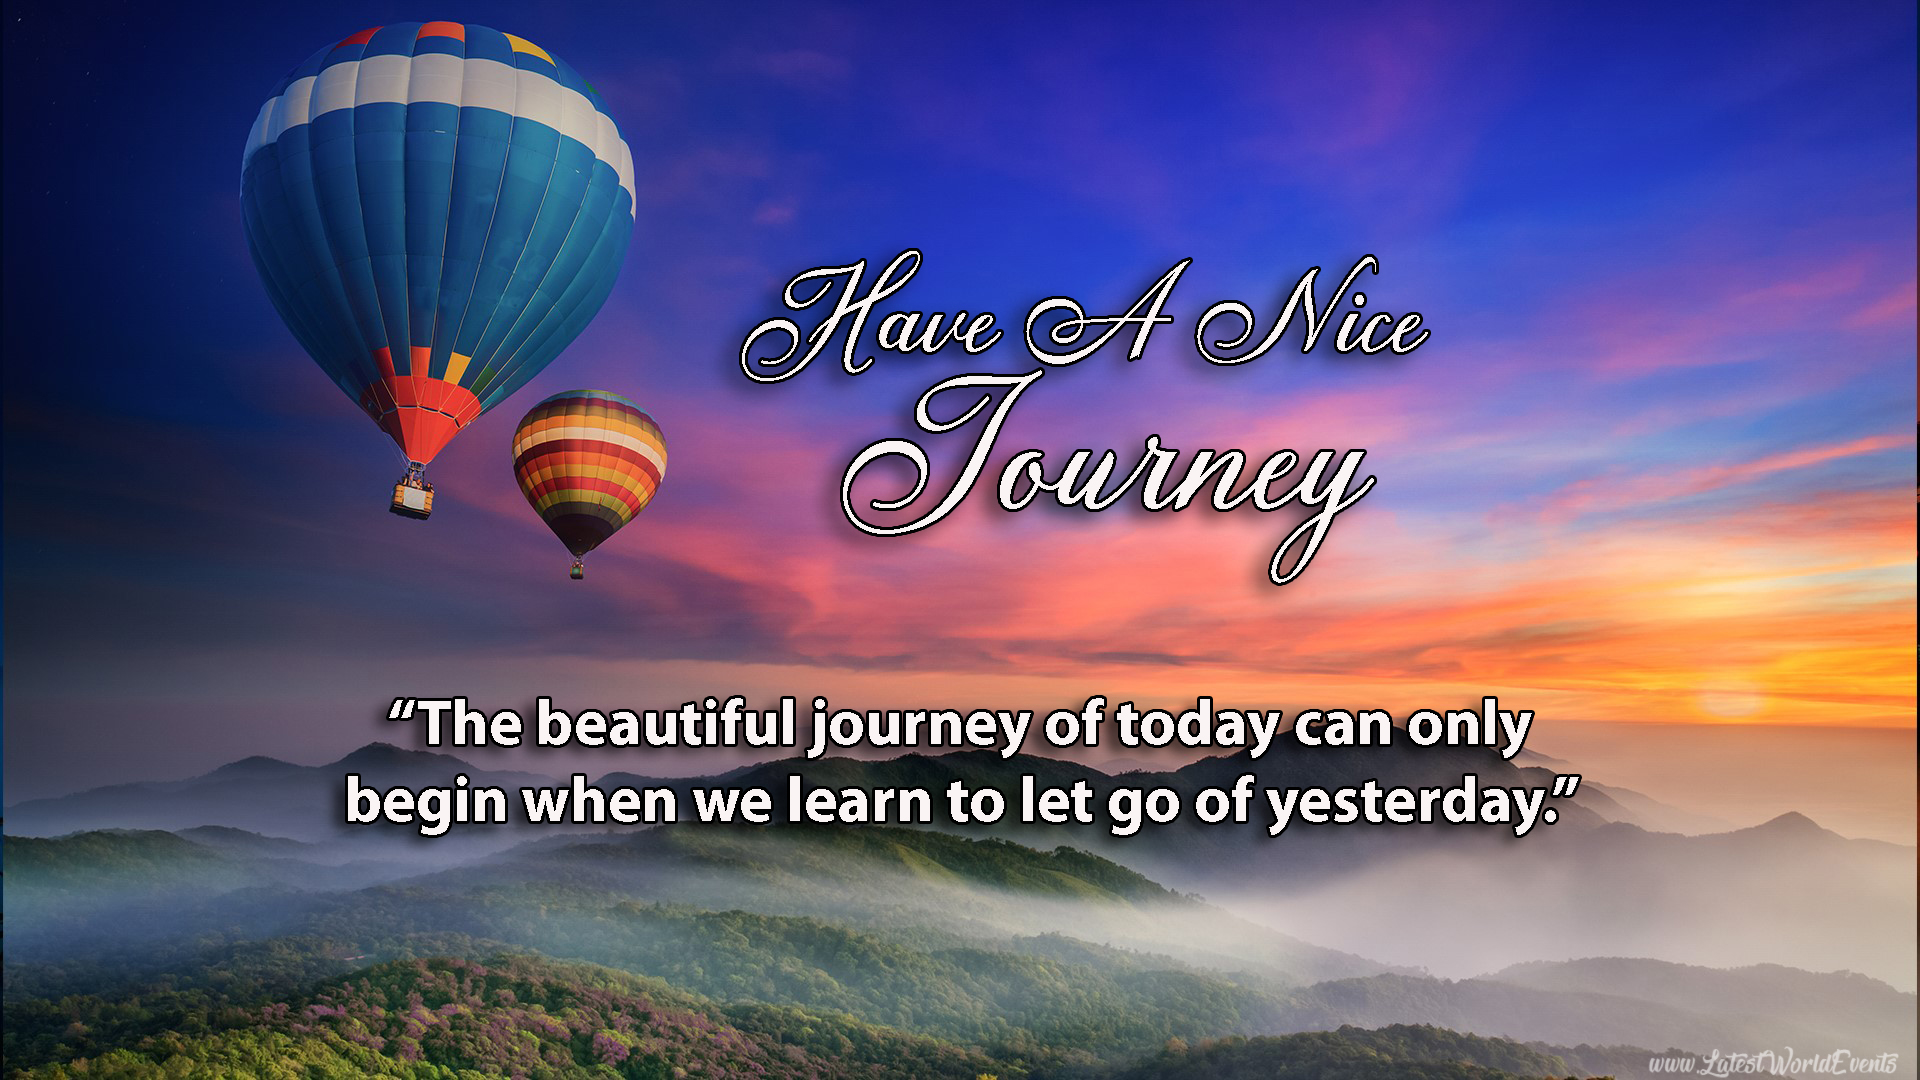 Download-have-a-nice-journey